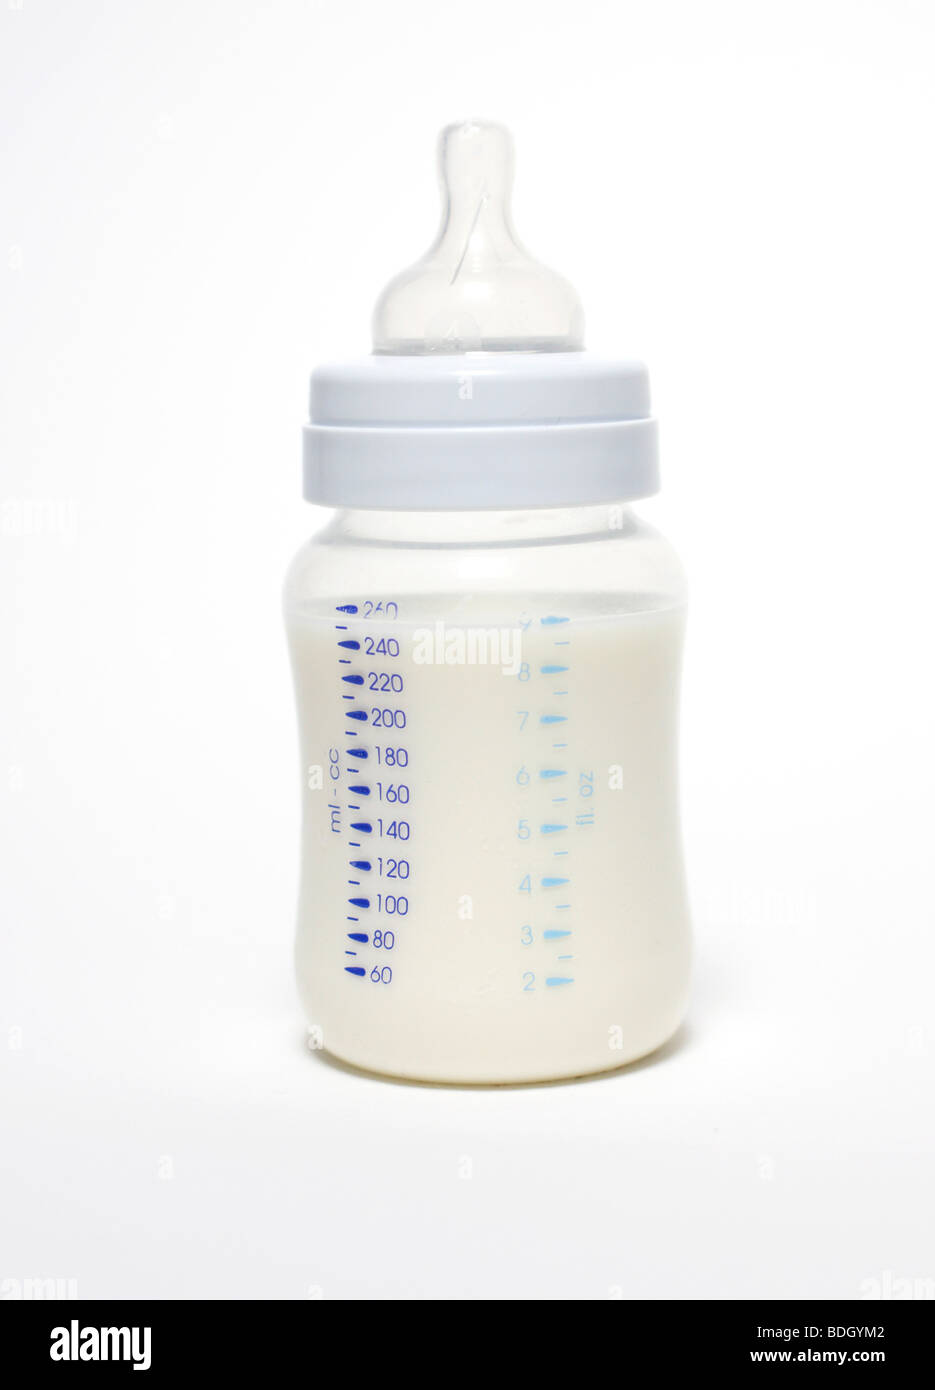 Baby Milk Bottle against a white background Stock Photo - Alamy